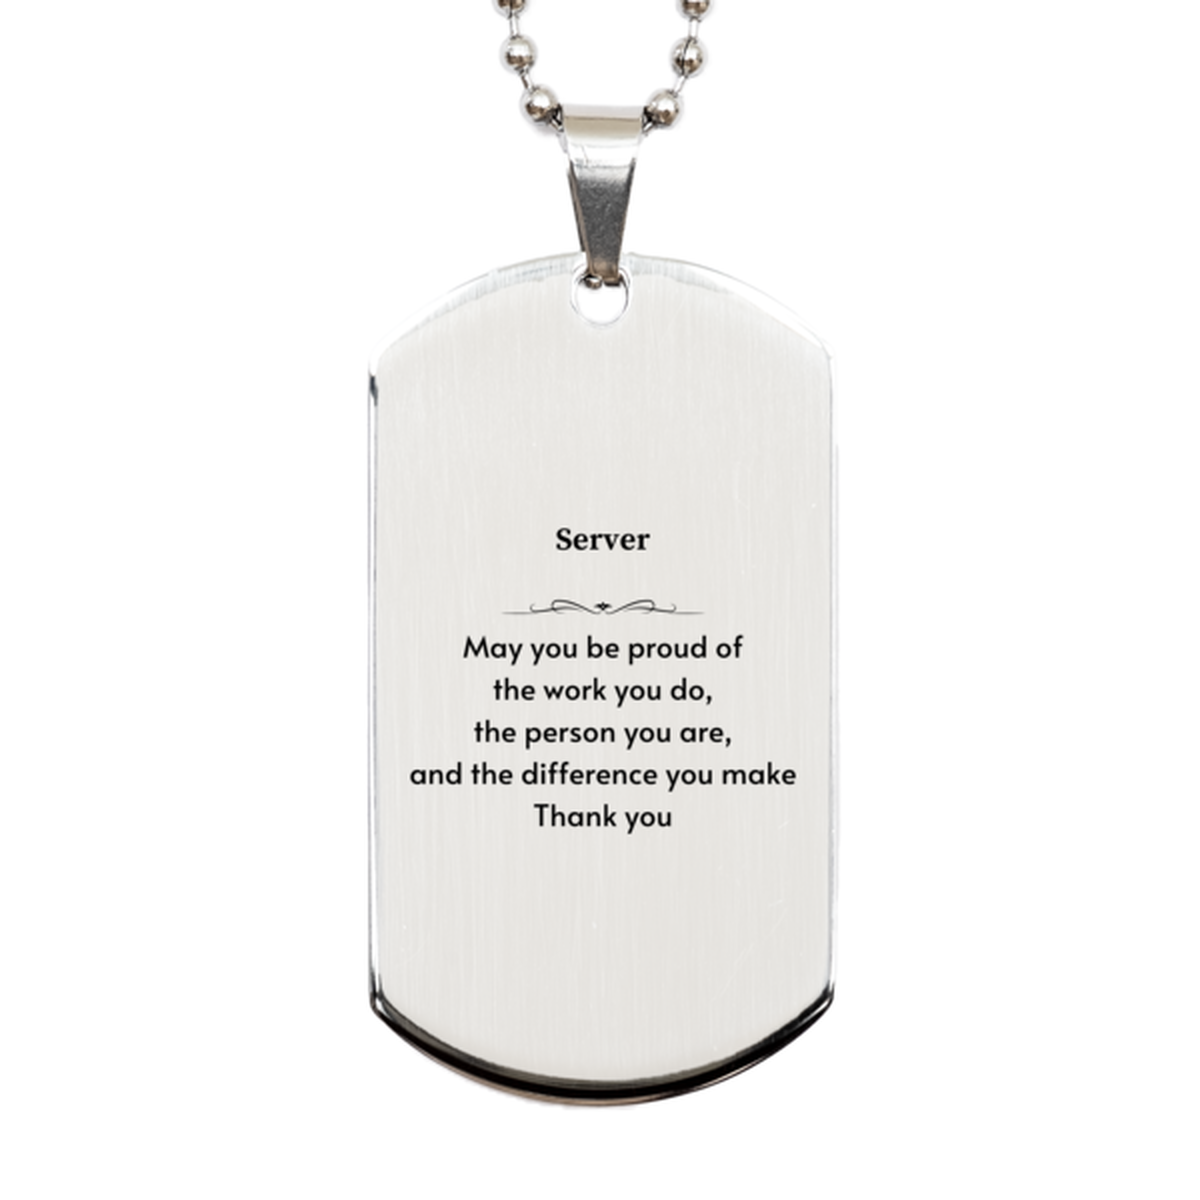 Heartwarming Silver Dog Tag Retirement Coworkers Gifts for Server, Server May You be proud of the work you do, the person you are Gifts for Boss Men Women Friends